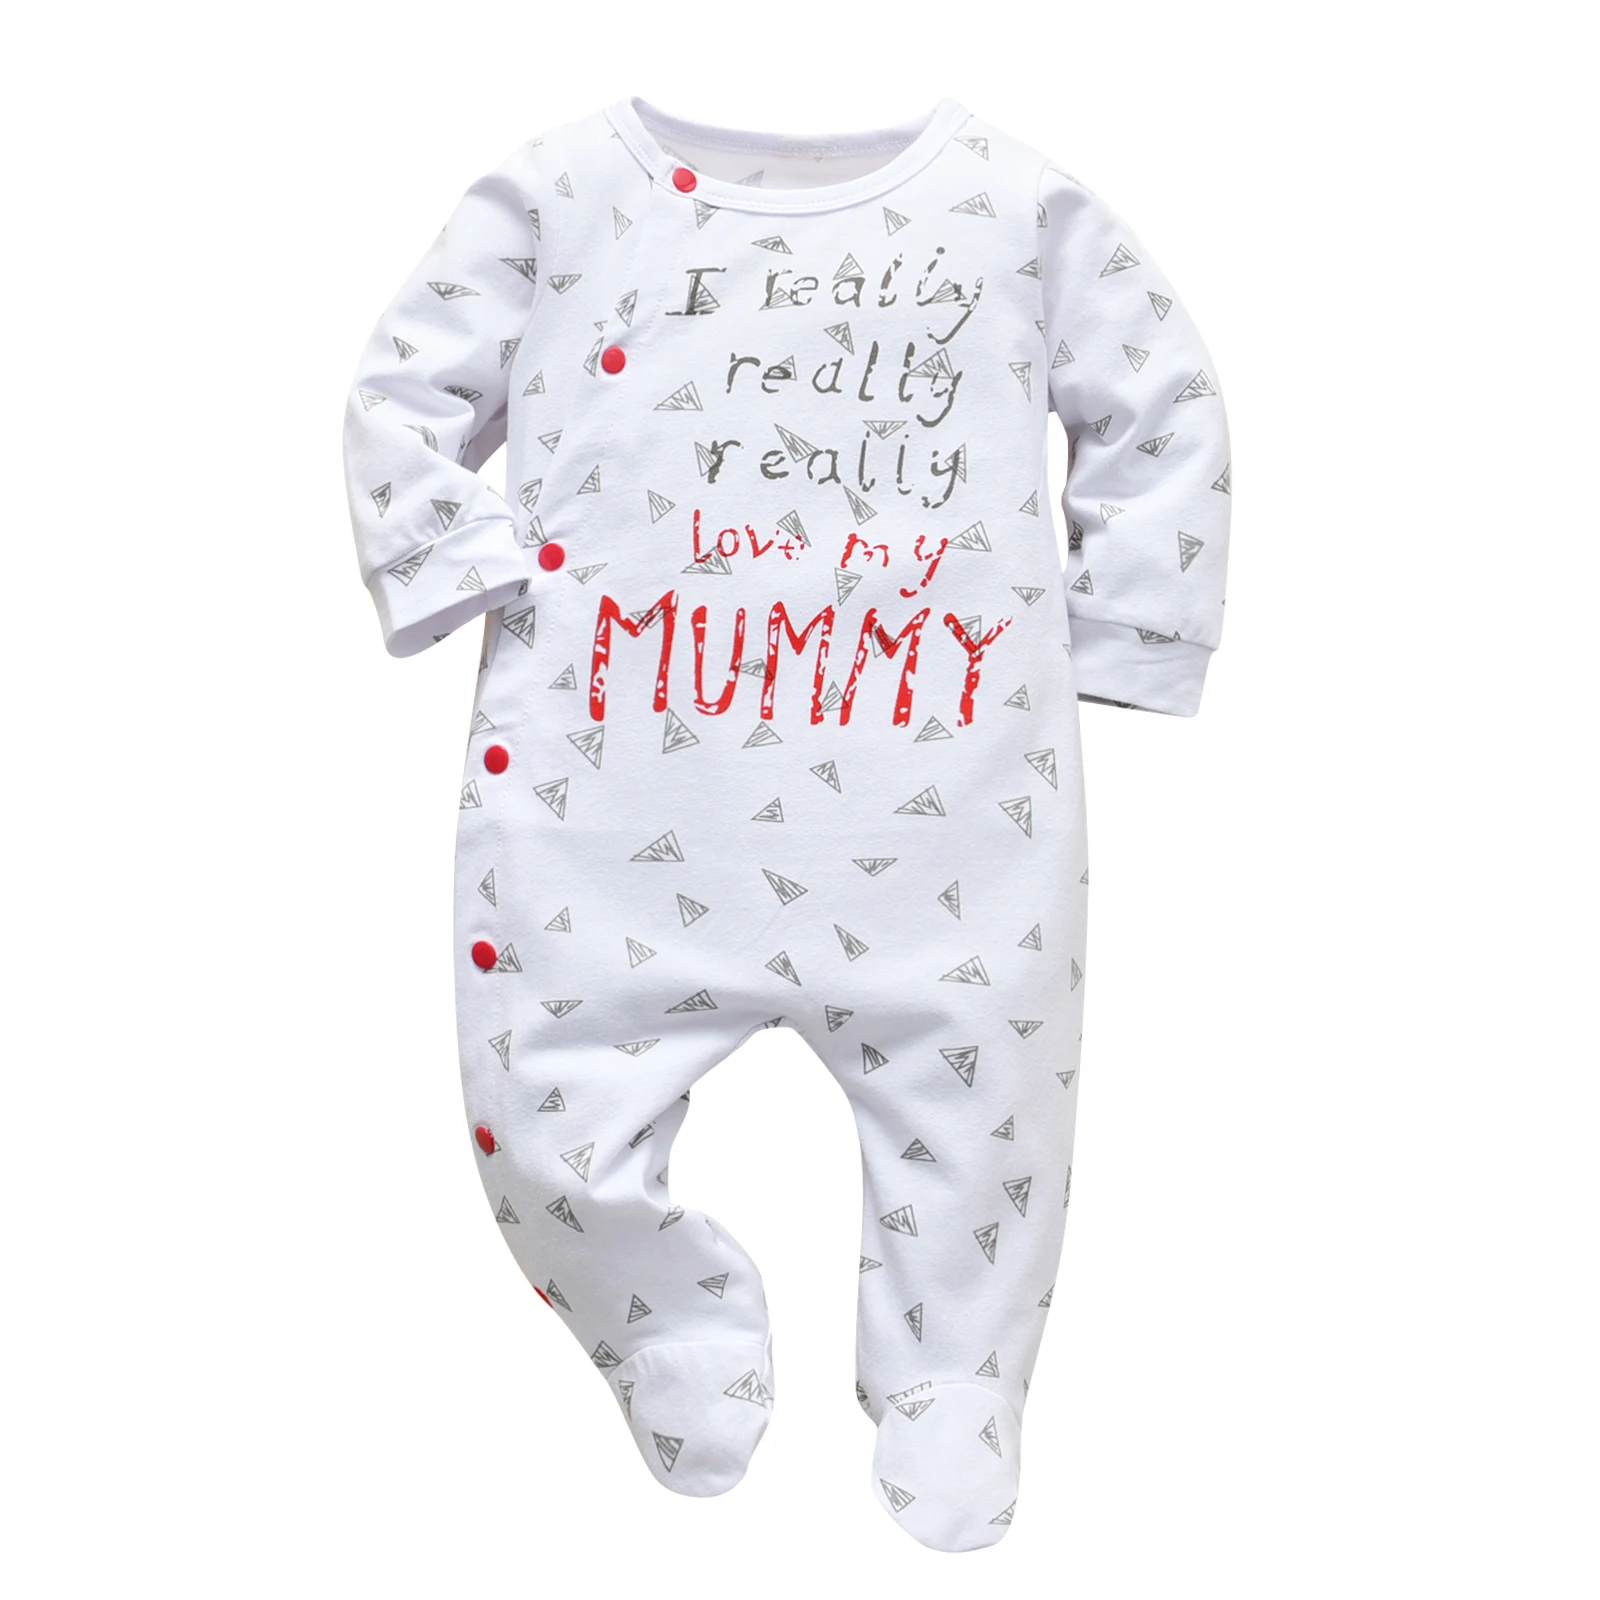 Newborn Baby Boys Girls Romper Cotton Long Sleeve MINI Letter One Piece Jumpsuit Pajamas Infant Clothes Outfit Crawling Clothing bamboo baby bodysuits	 Baby Rompers